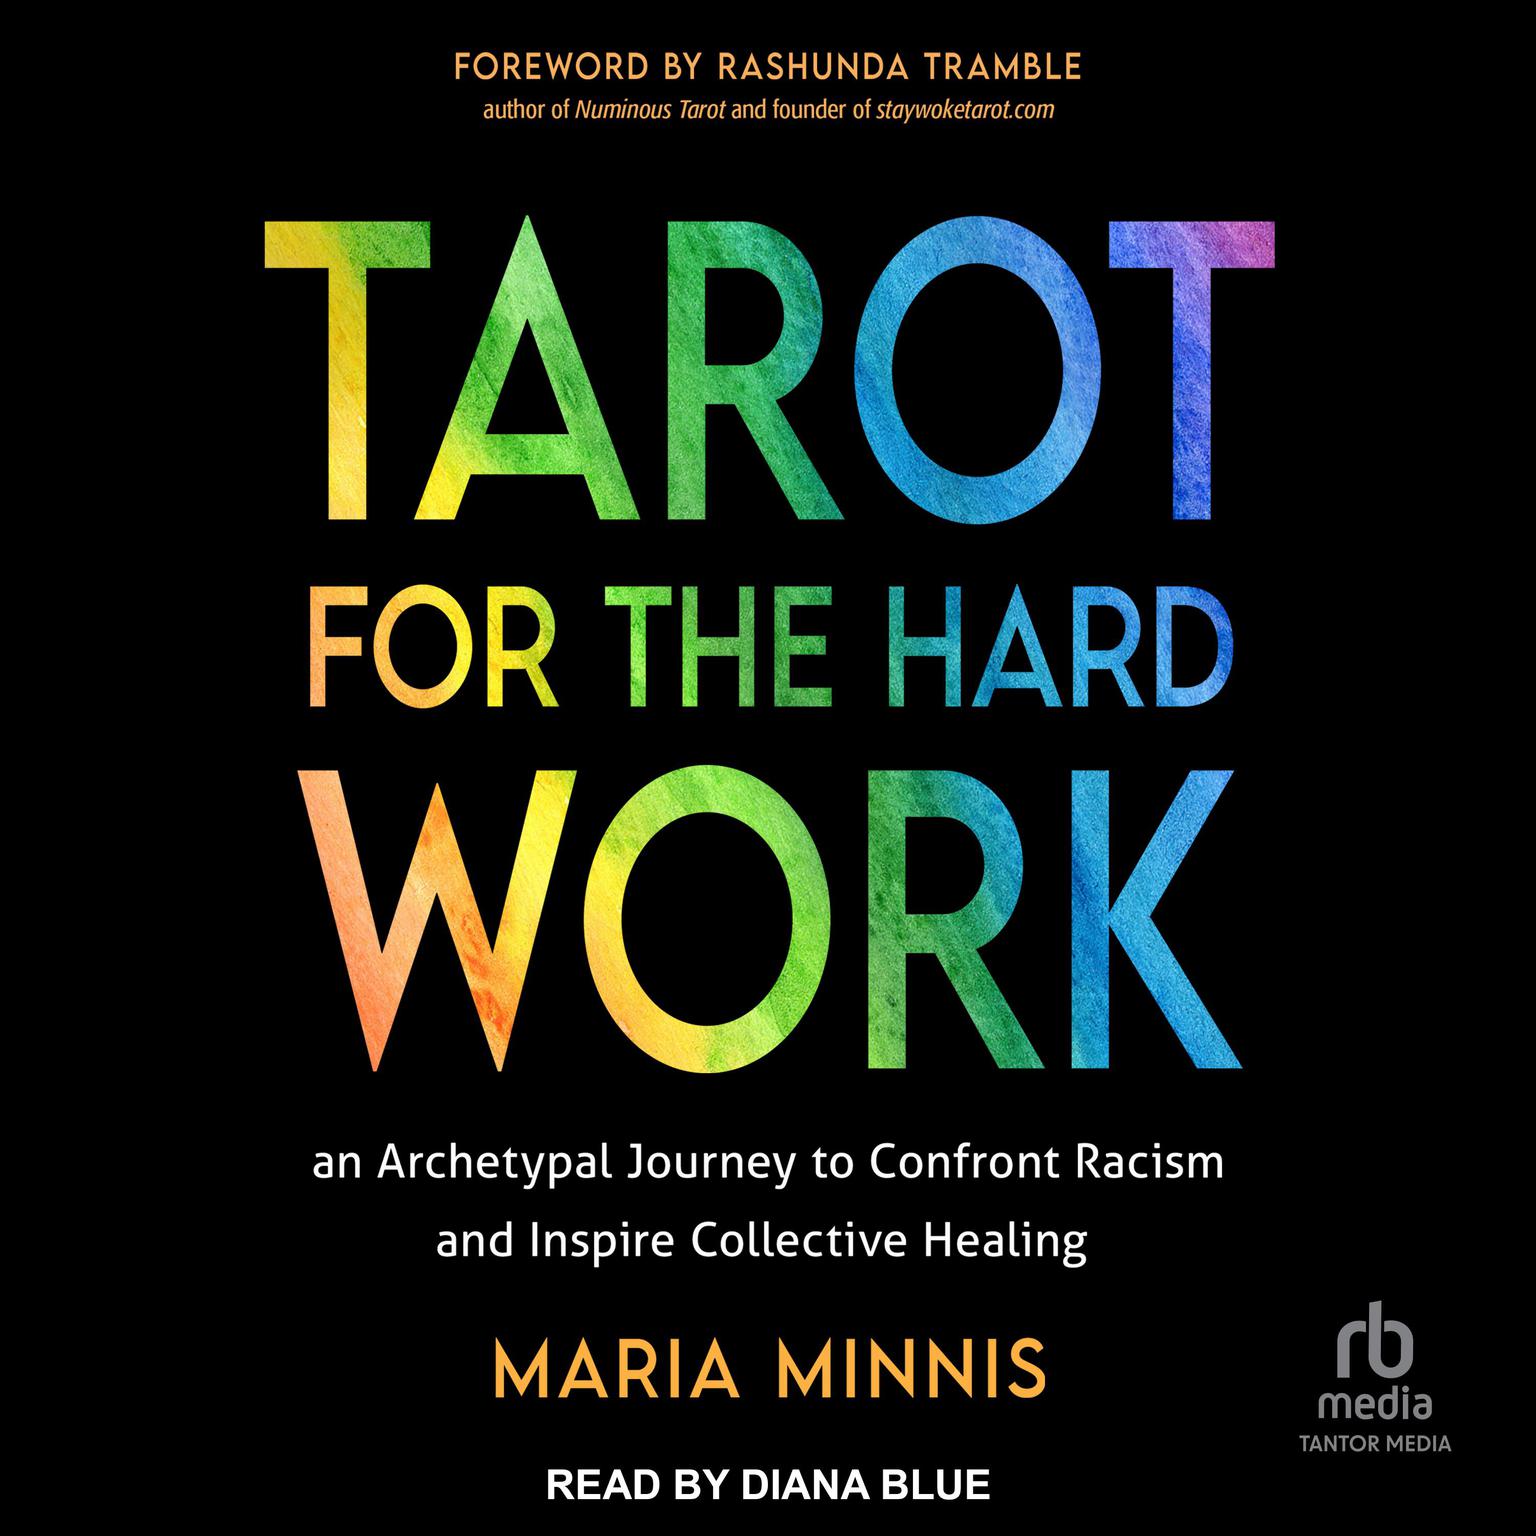 Tarot for the Hard Work: An Archetypal Journey to Confront Racism and Inspire Collective Healing Audiobook, by Maria Minnis